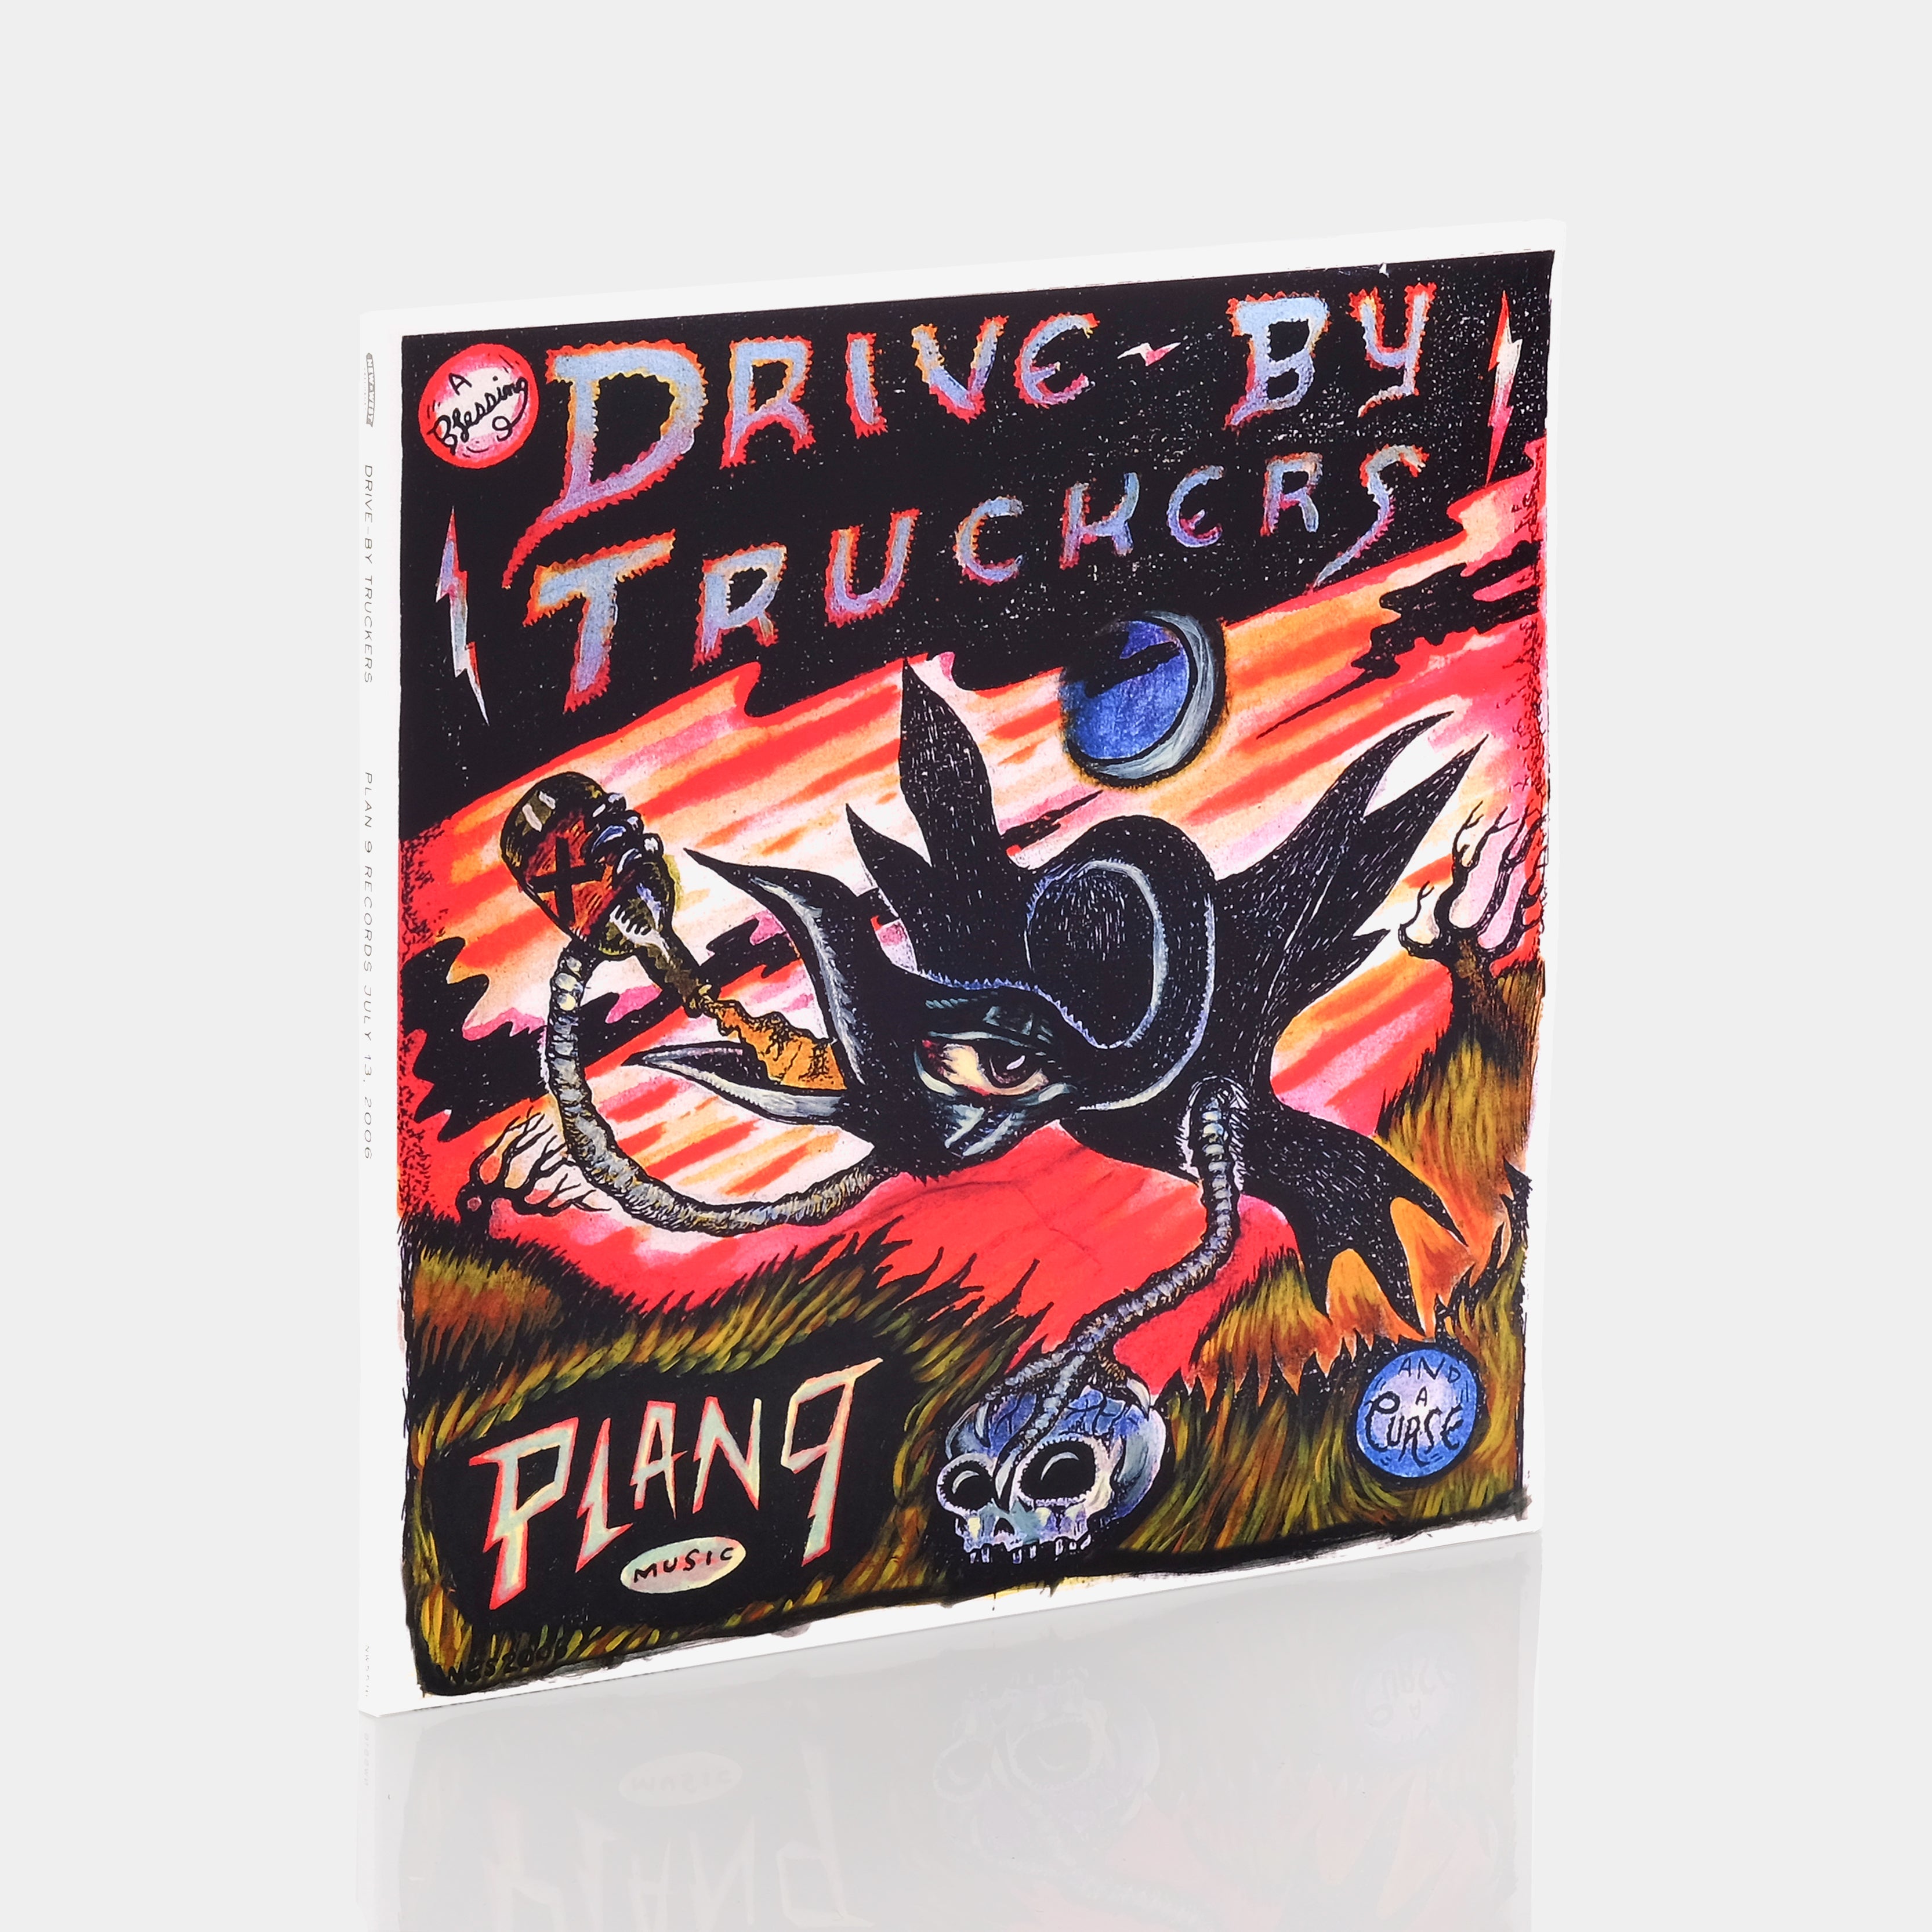 Drive-By Truckers - Plan 9 Records July 13, 2006 3xLP Vinyl Record